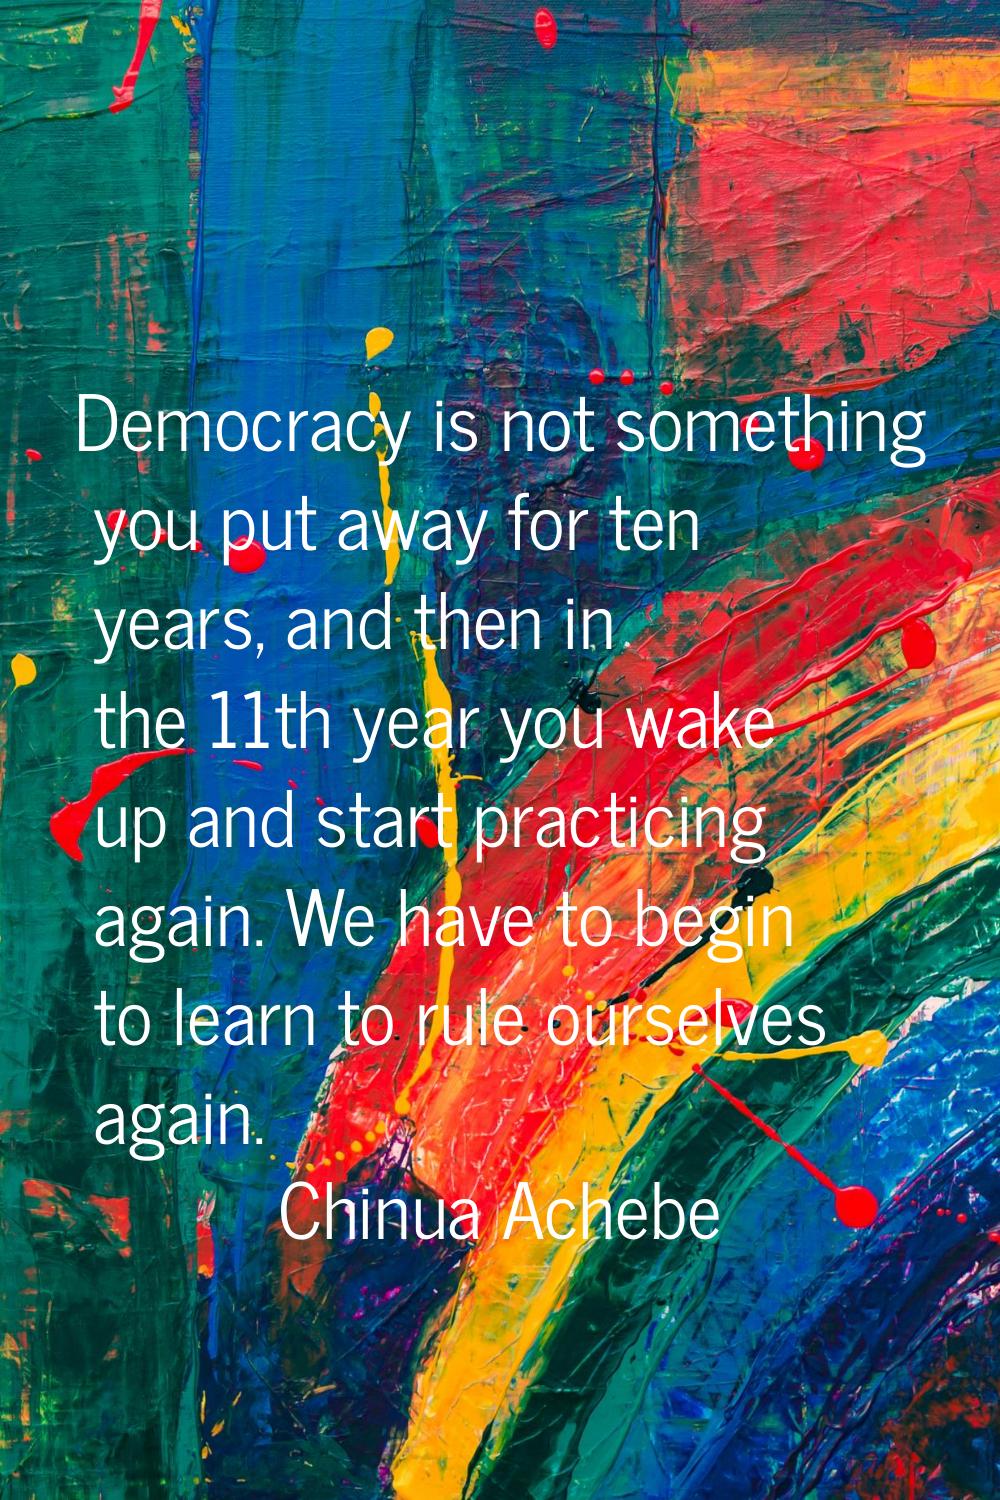 Democracy is not something you put away for ten years, and then in the 11th year you wake up and st